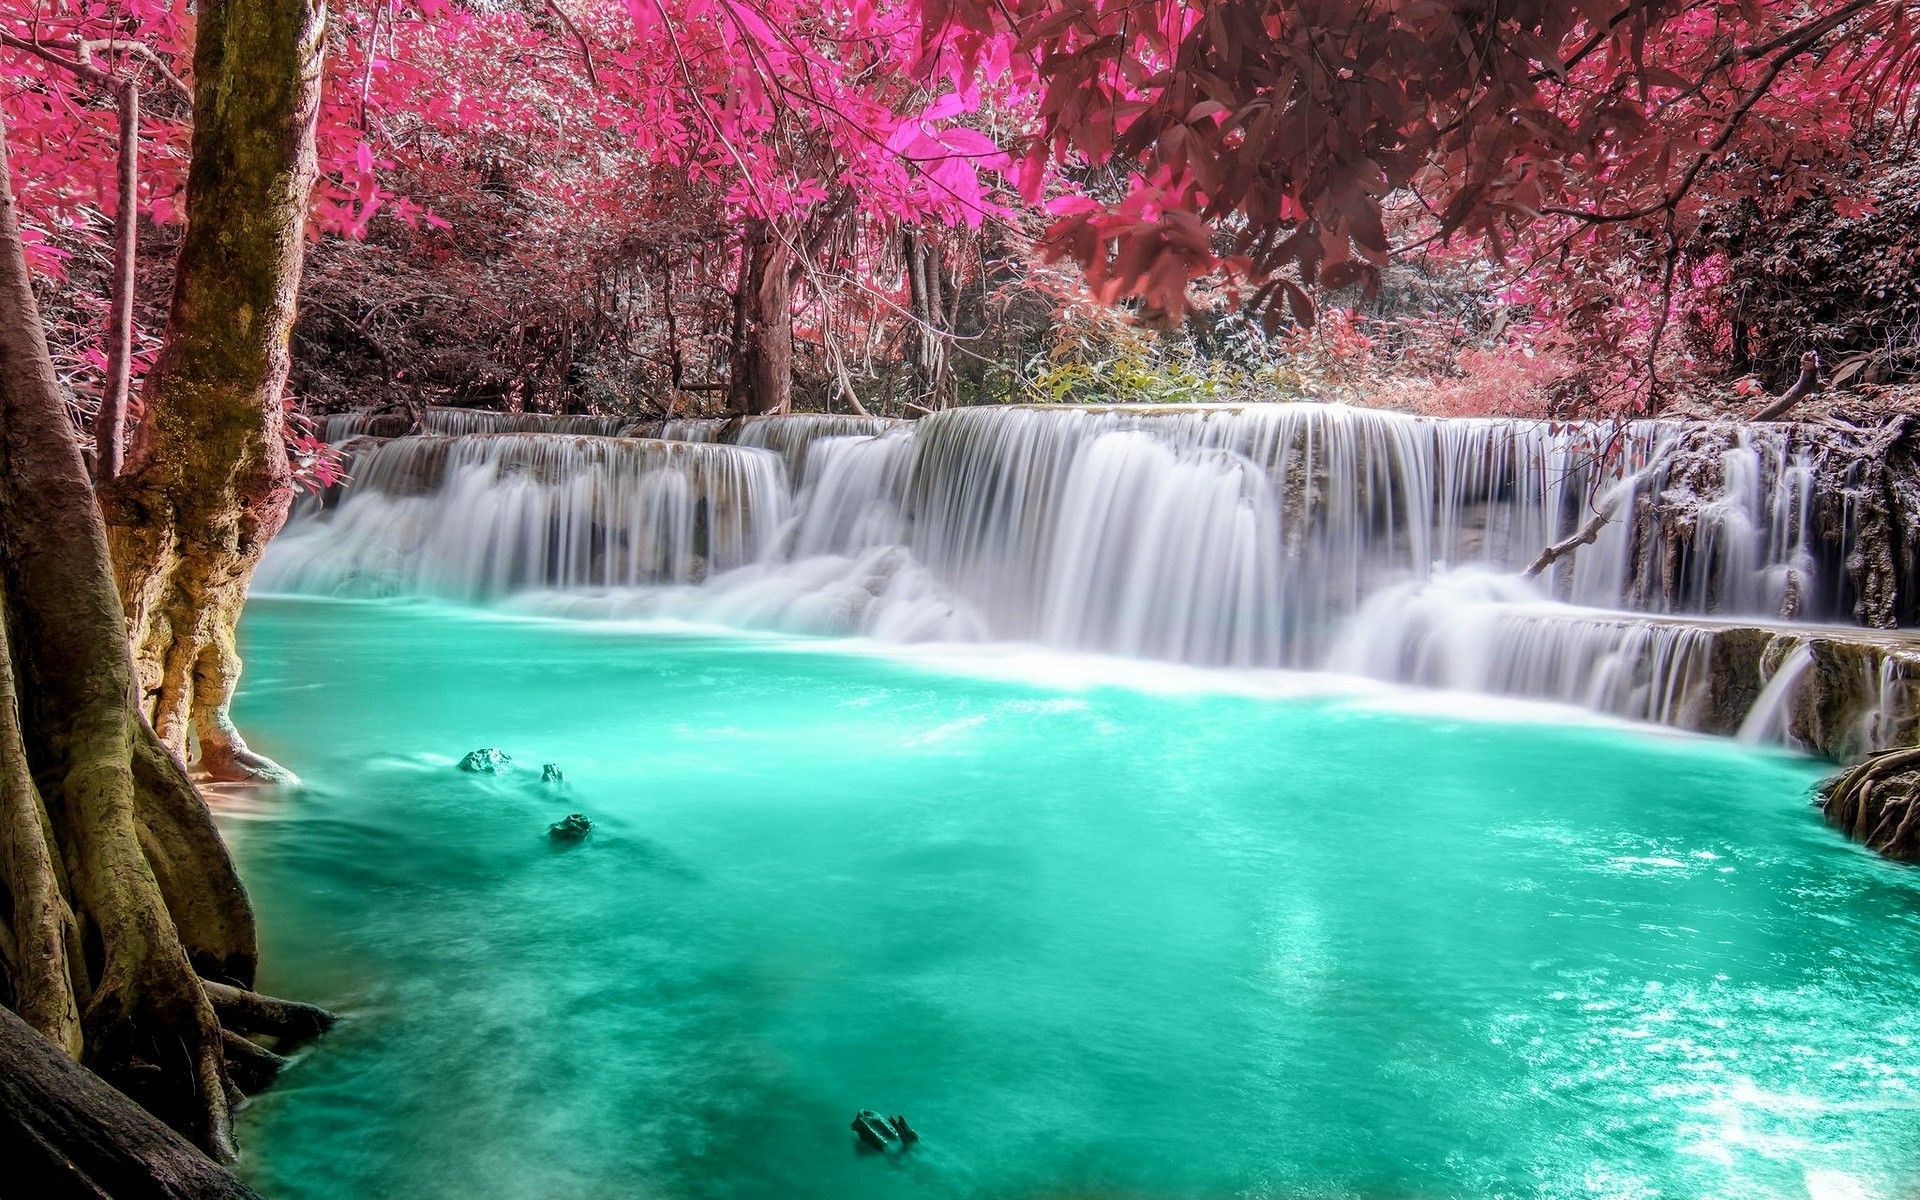 Download HD waterfall, Forest, Colorful, Nature, Thailand, Trees, Landscape, Pink, Turquoise, White, Tropical, R. Waterfall, Forest waterfall, Waterfall wallpaper